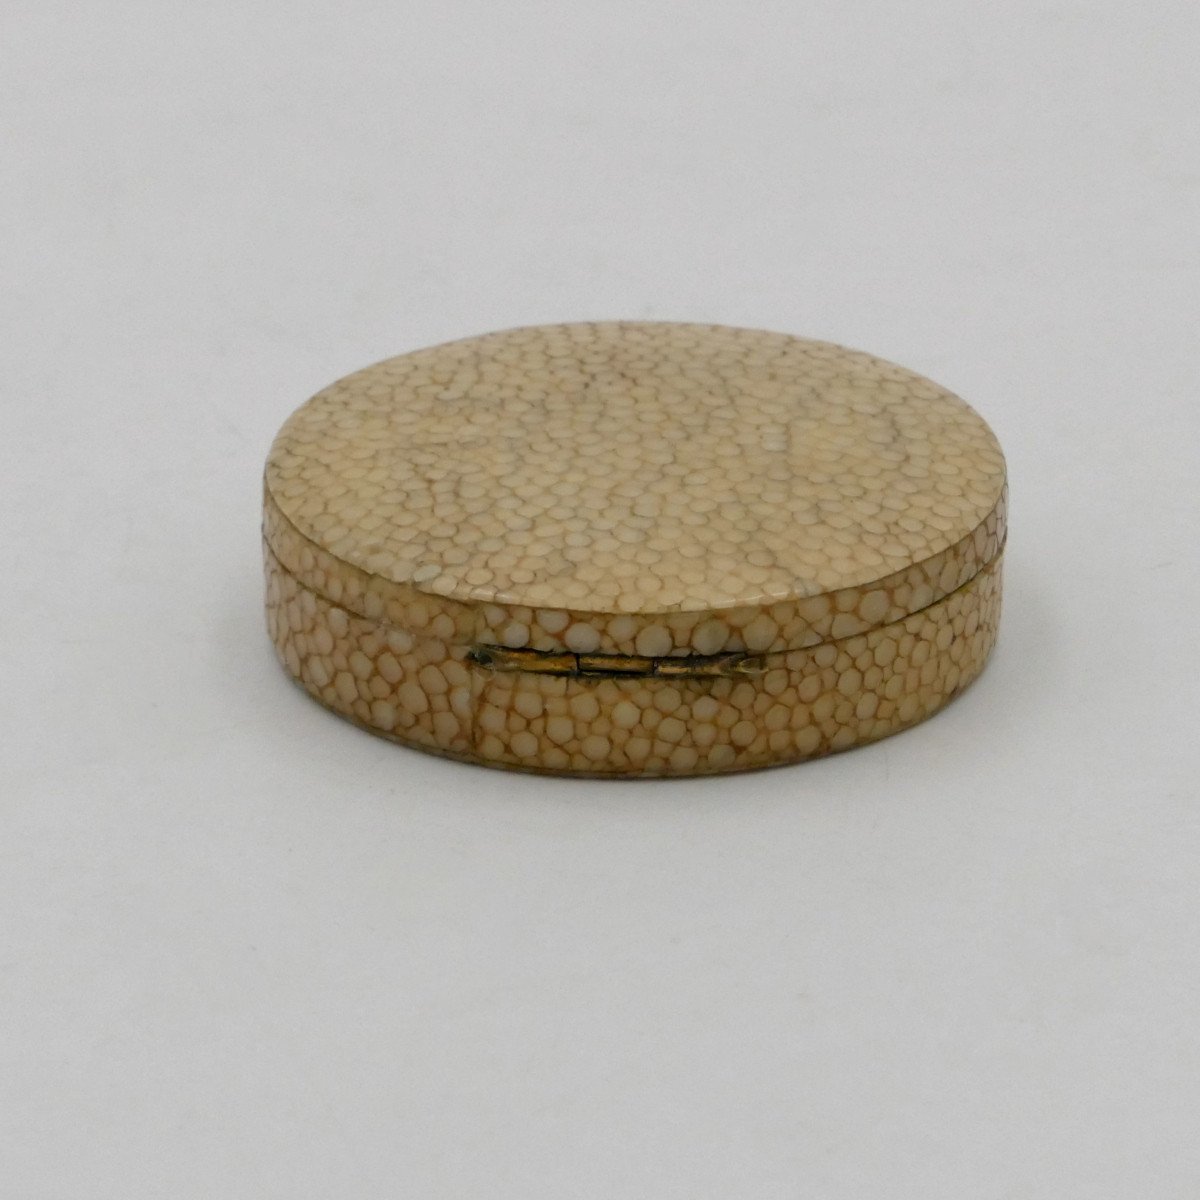 Powder Box Or Pill Box In Shagreen, Gilded Metal And Mirror, 1930.-photo-3